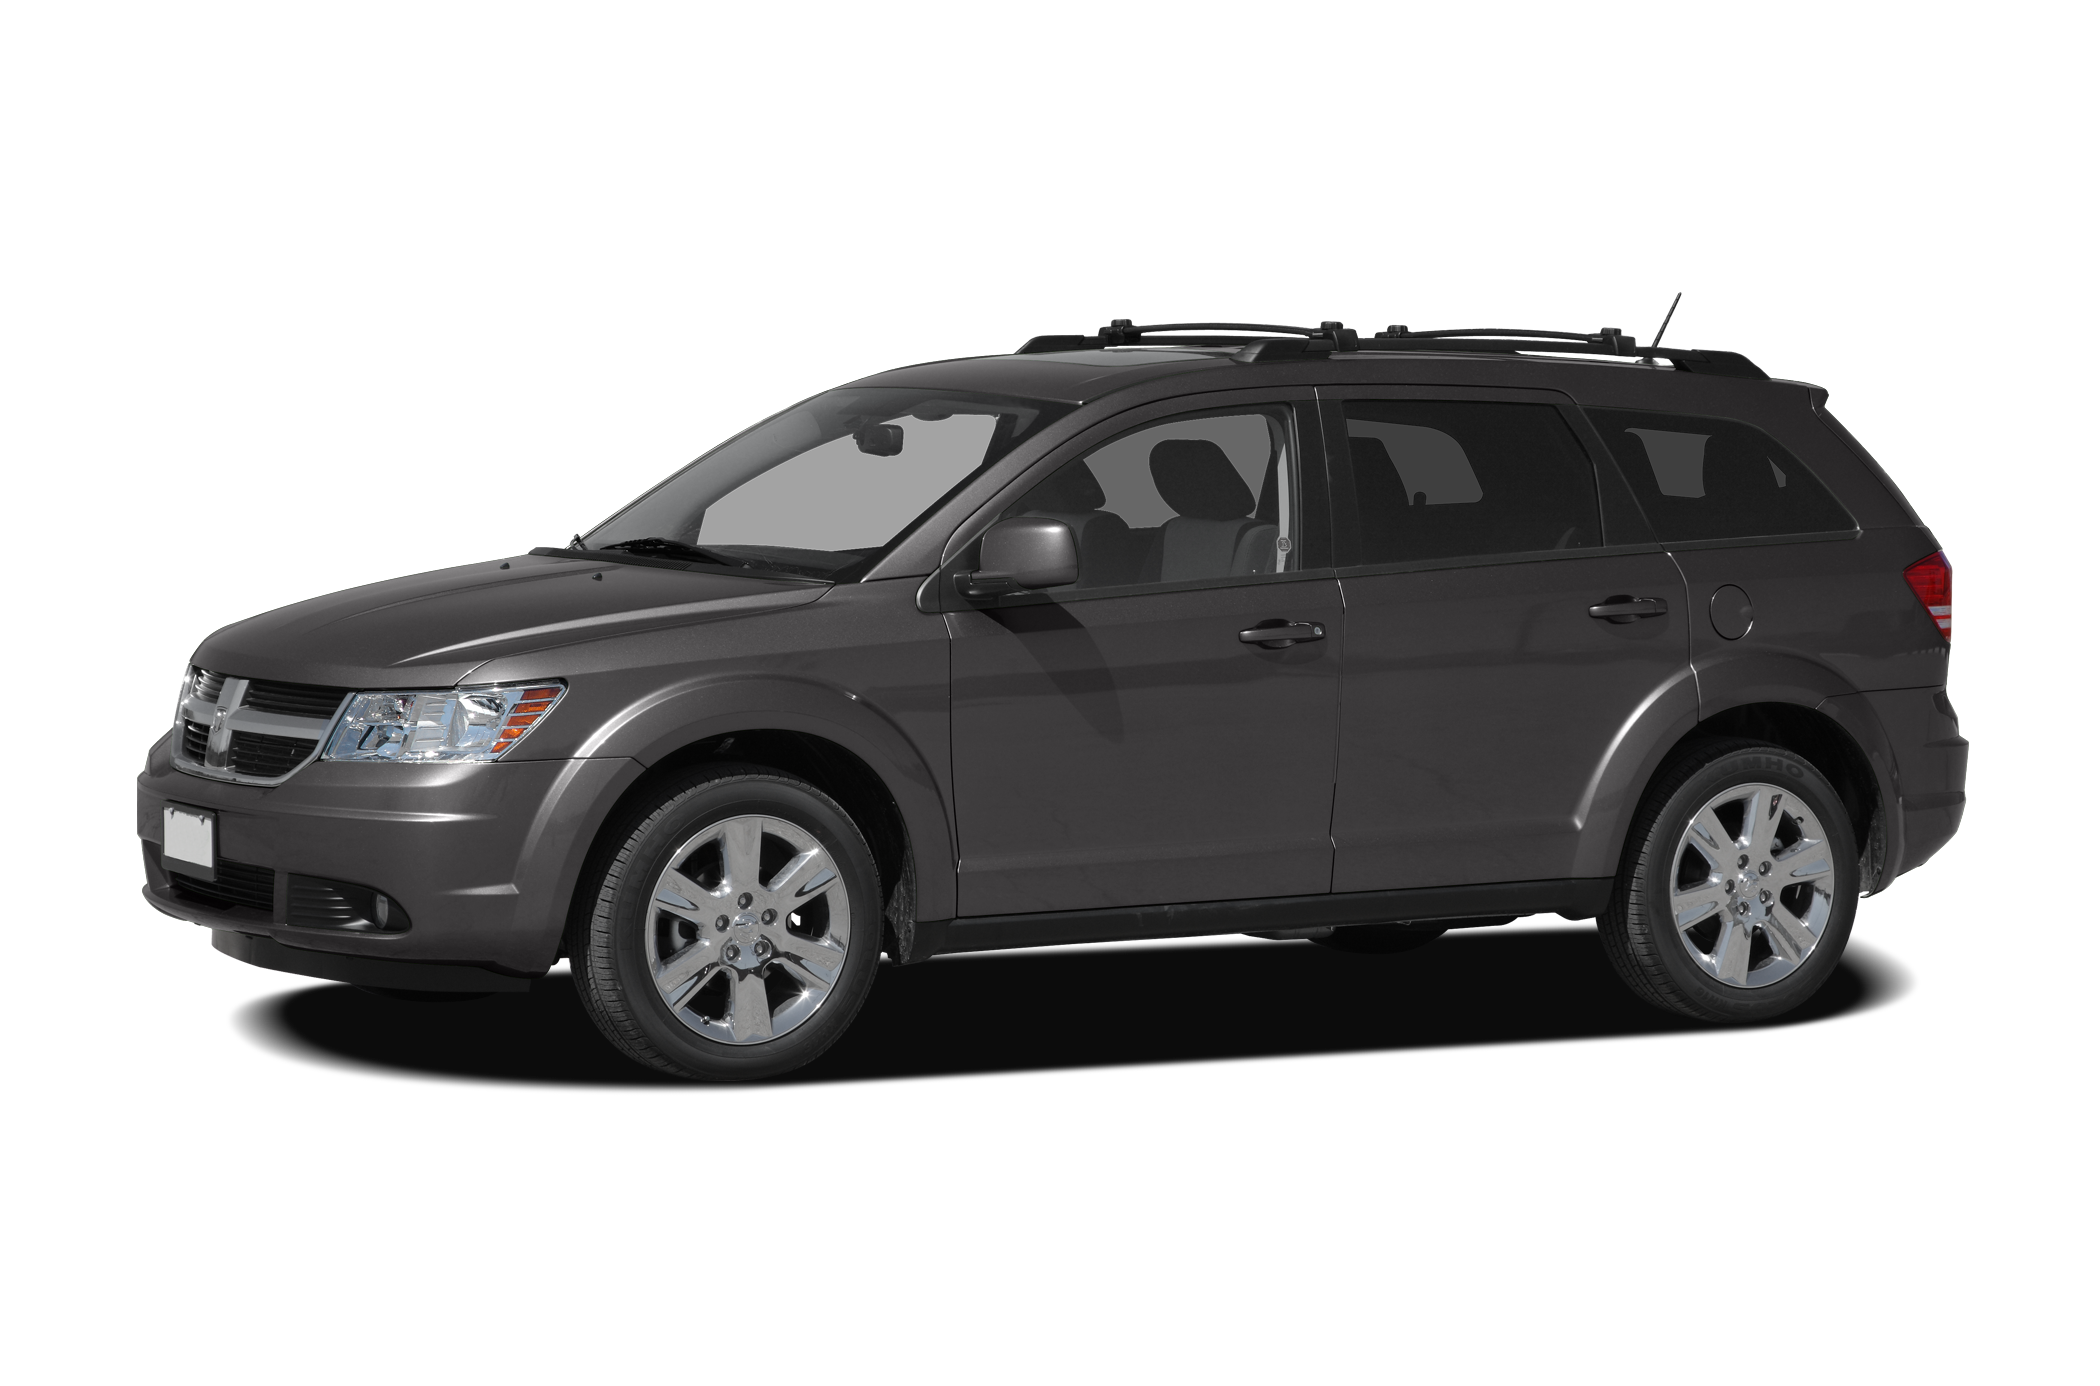 Side view of the 2009 Dodge Journey